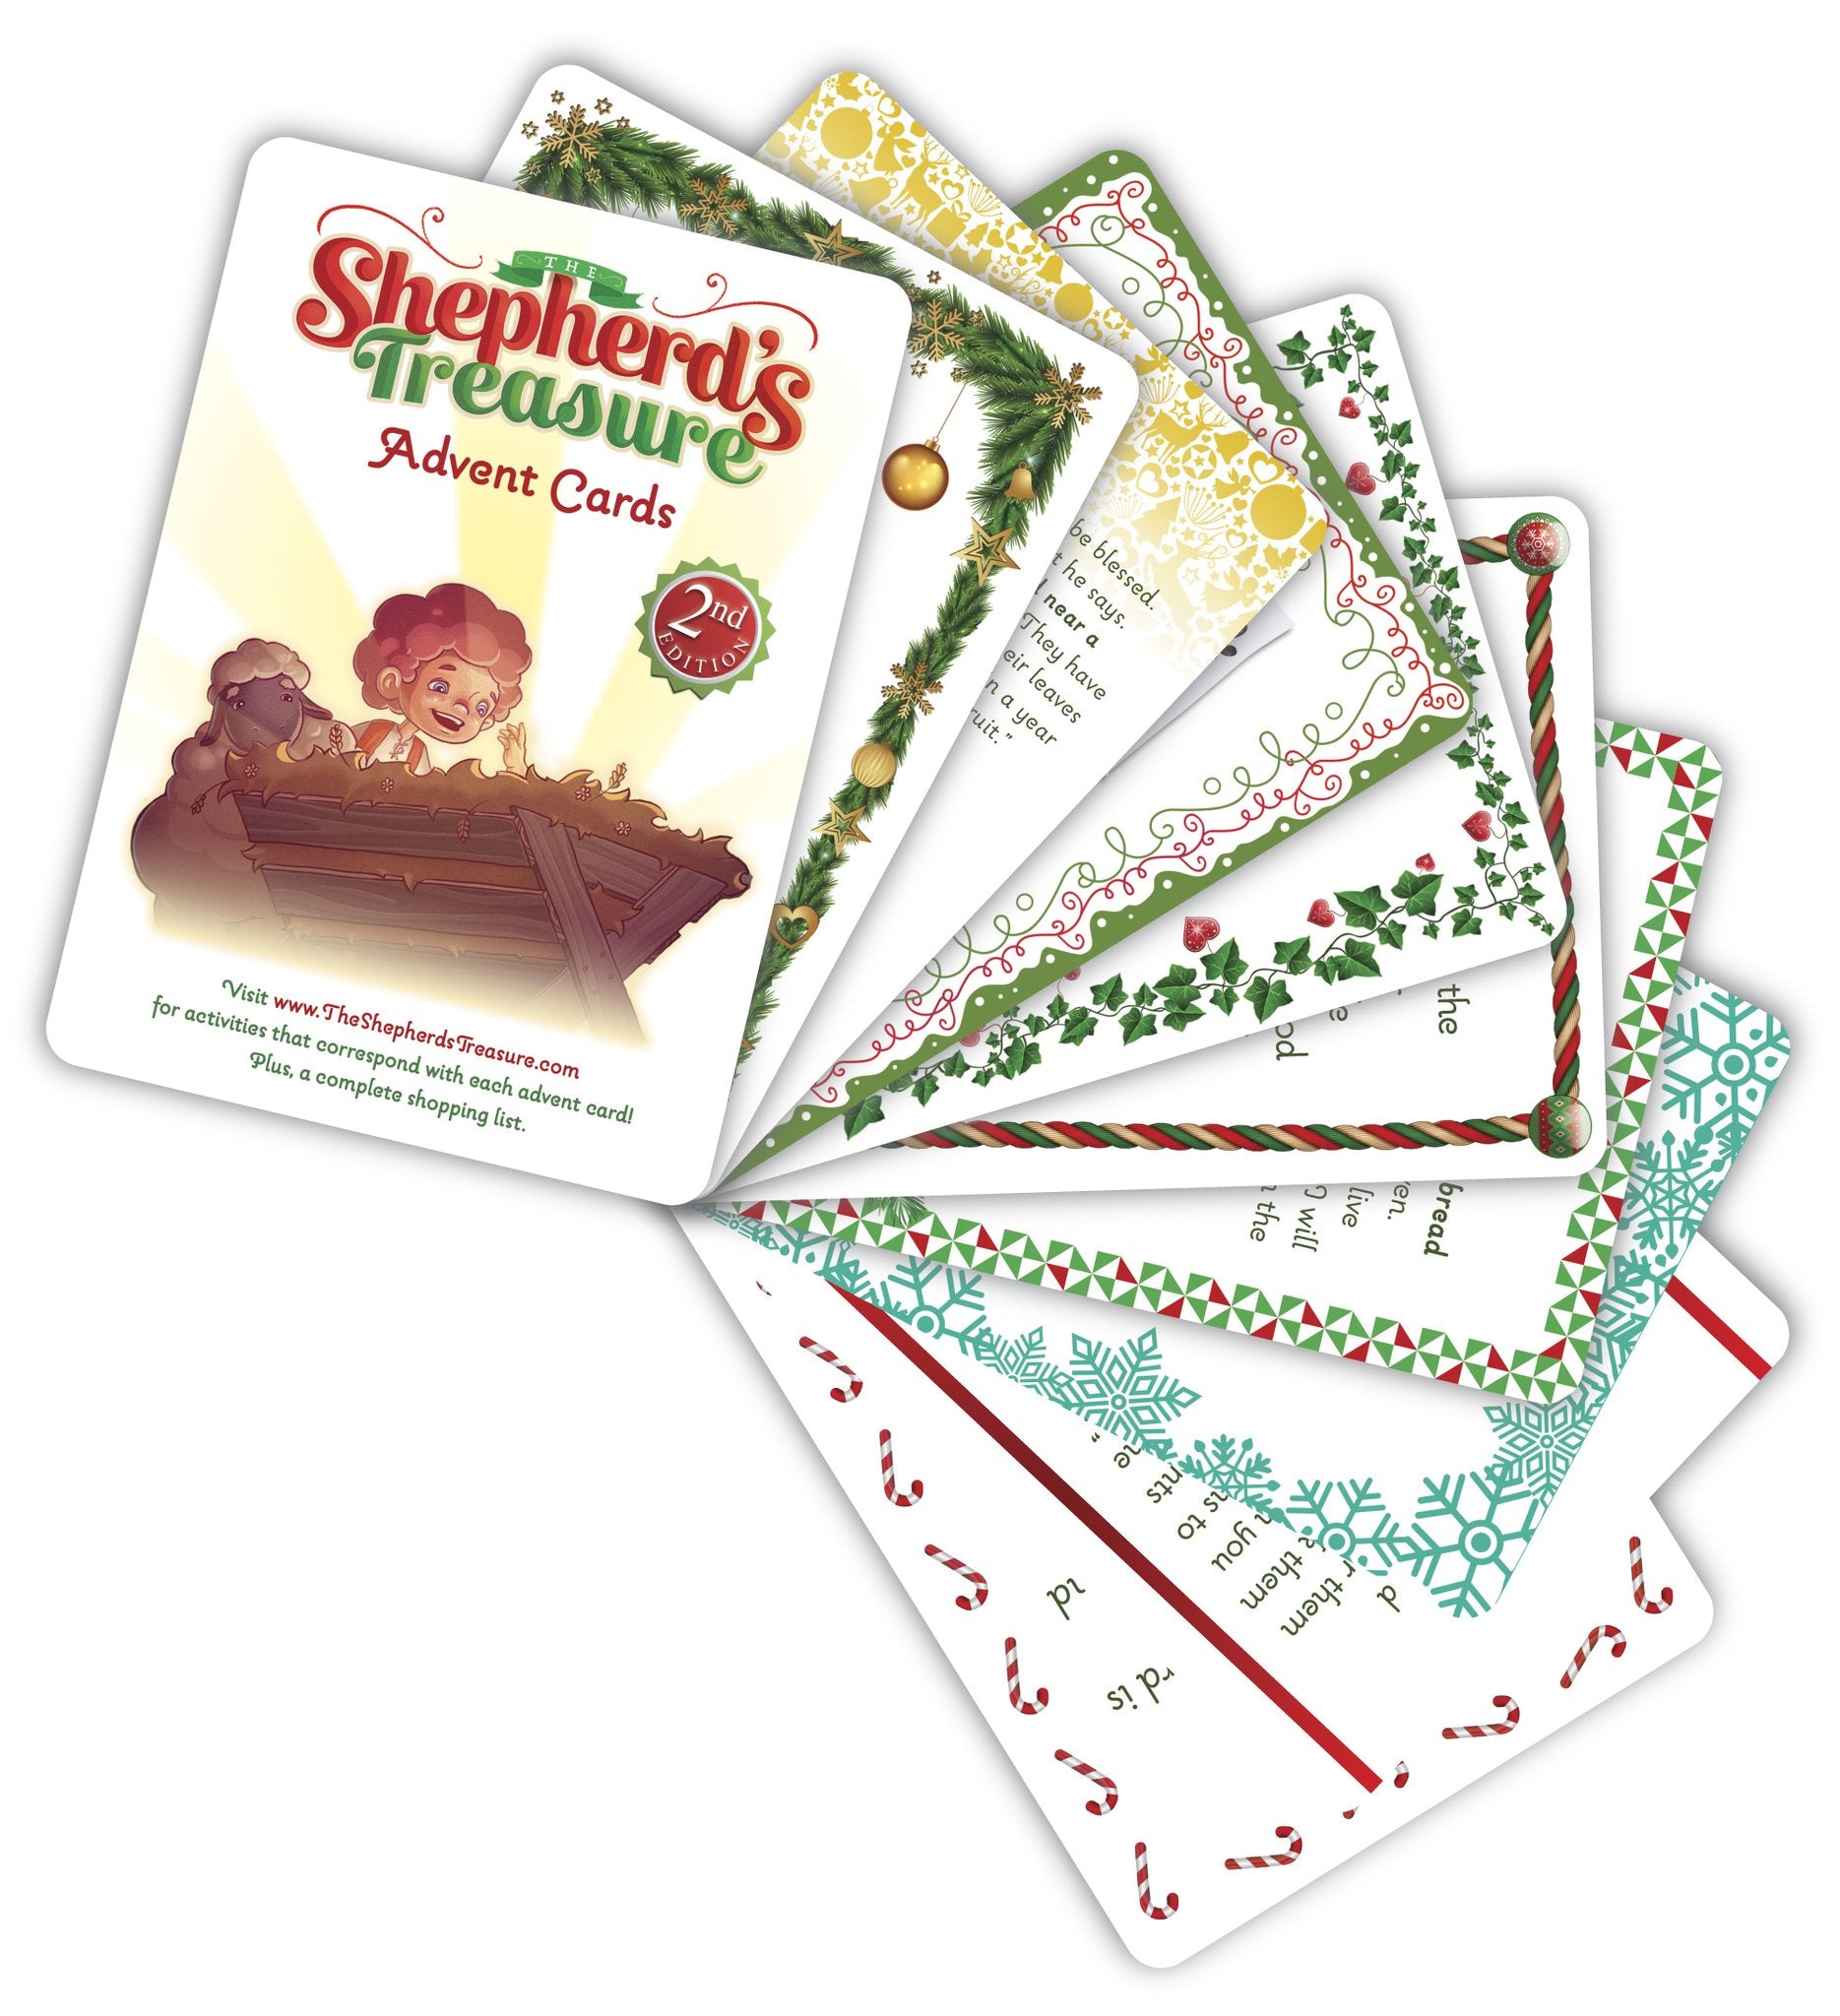 The Shepherd's Treasure Advent Cards (Second Edition)